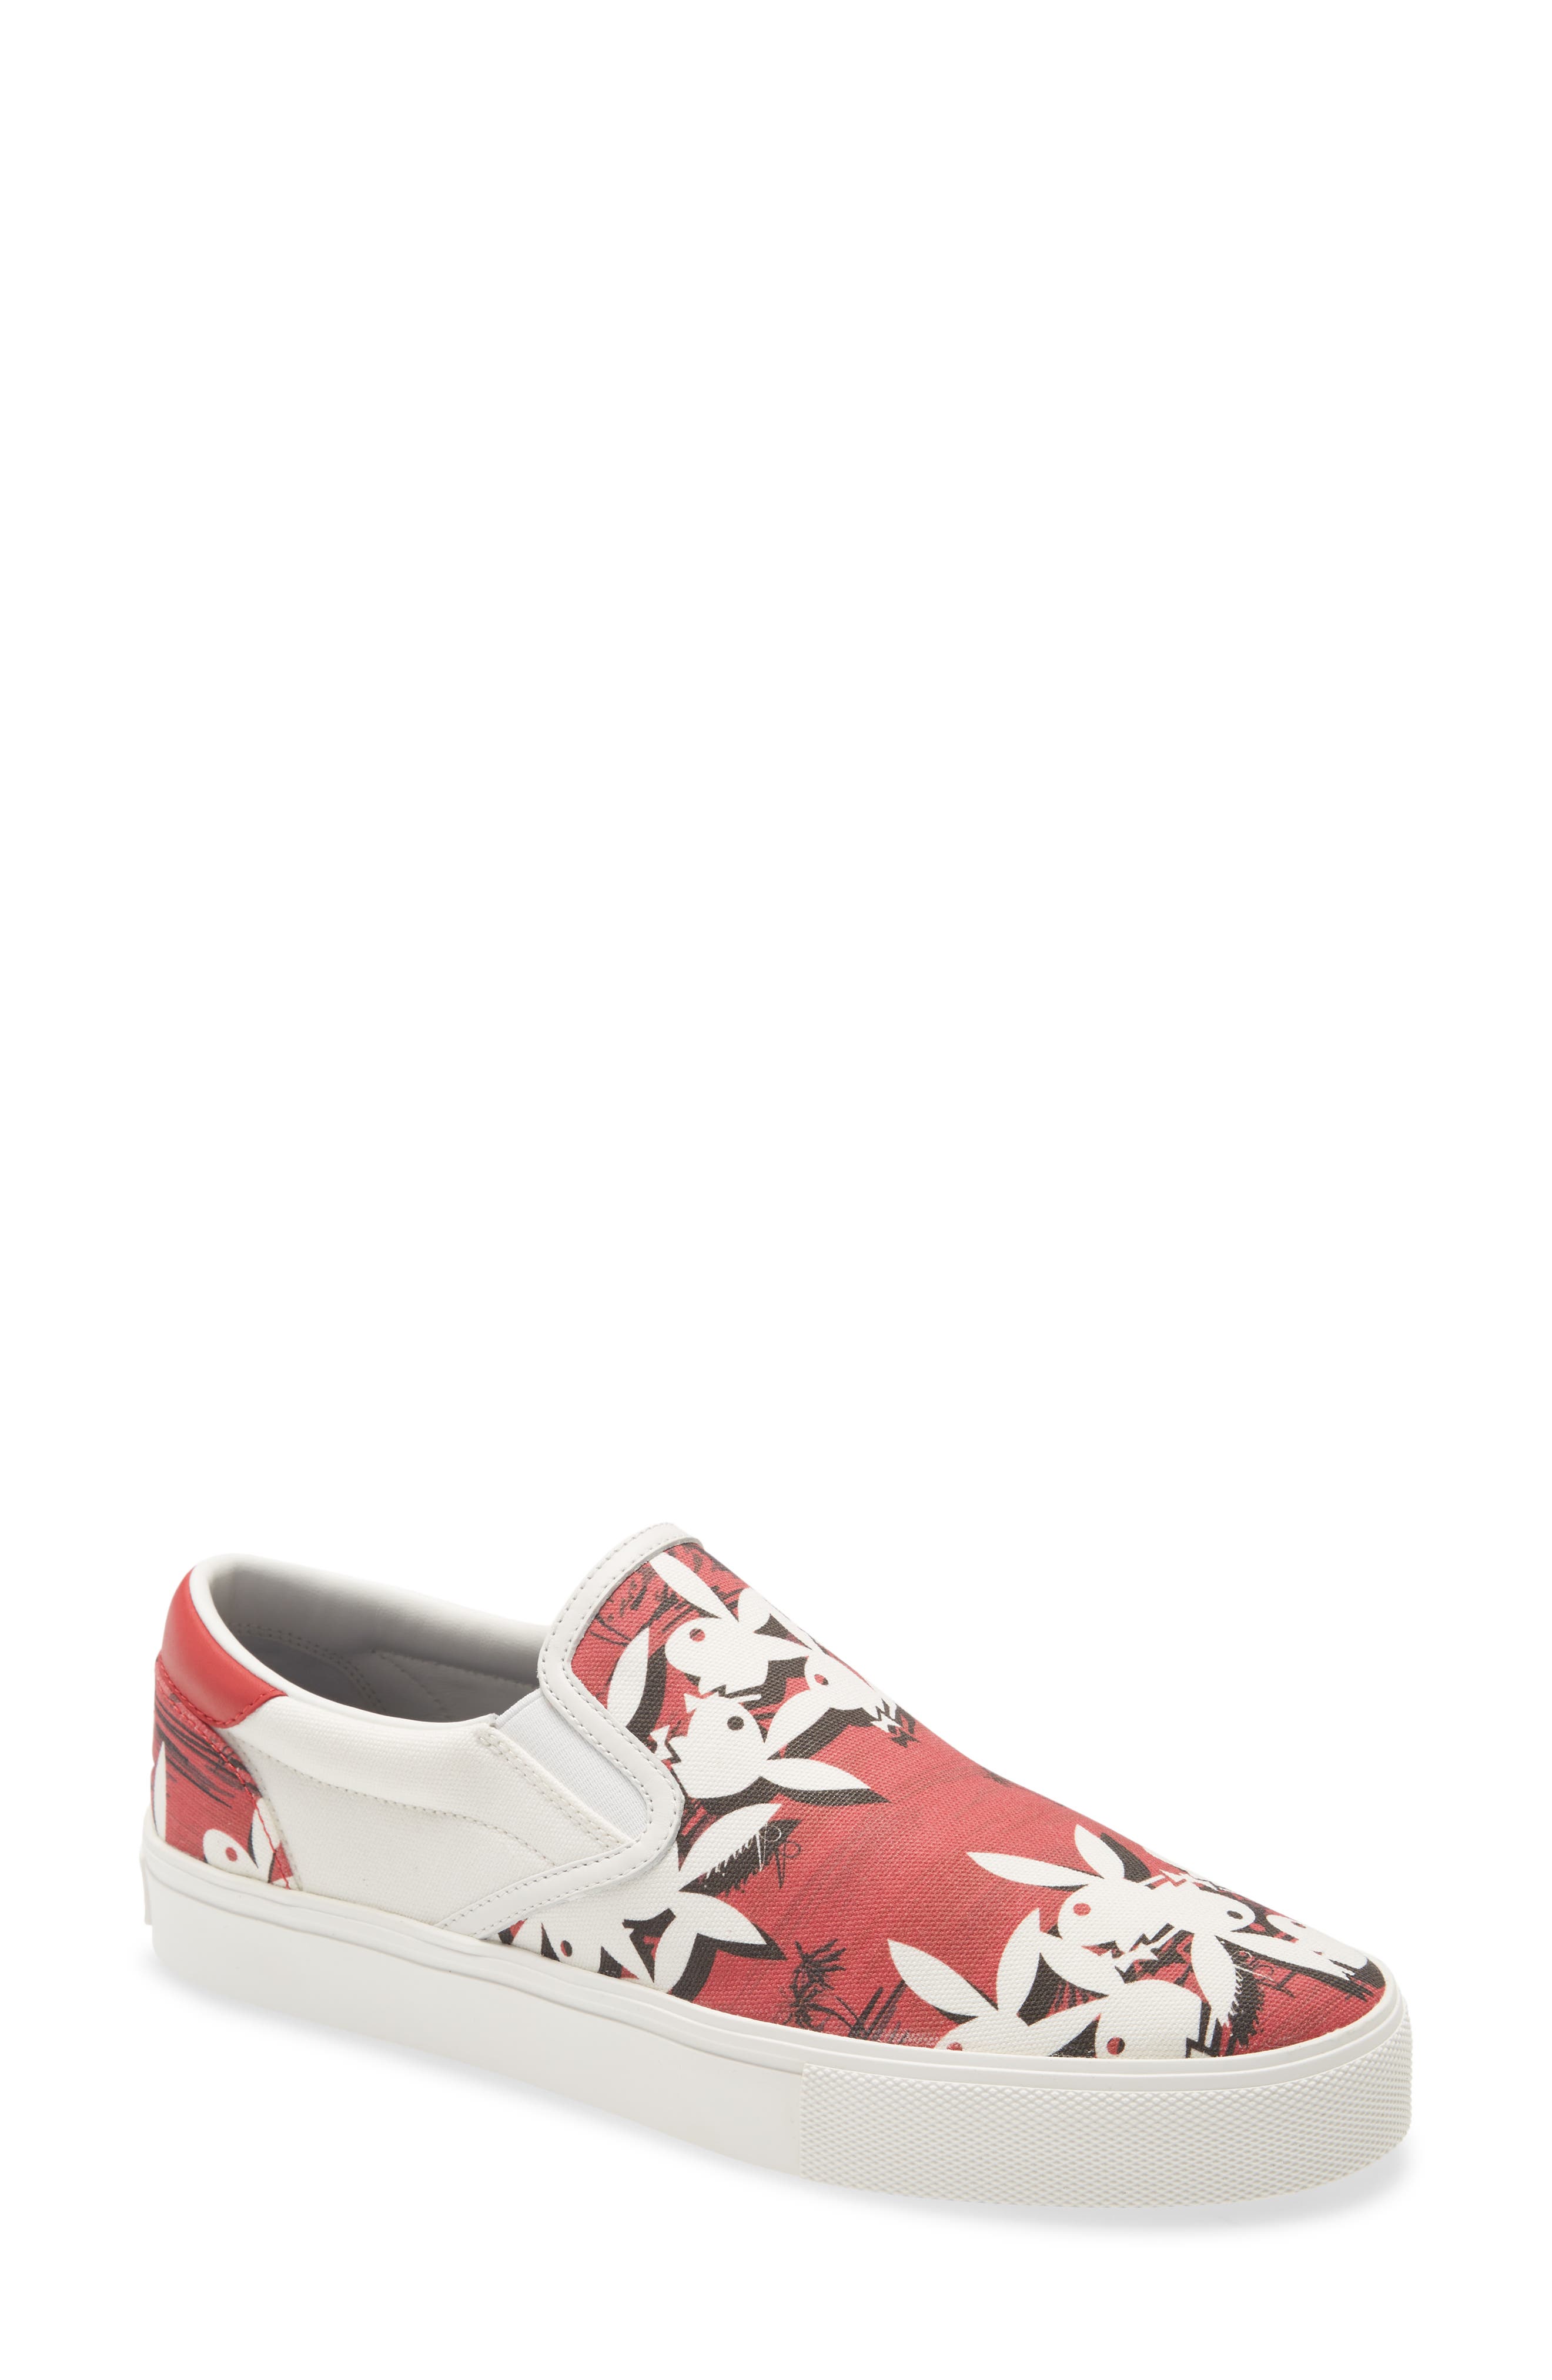 AMIRI Playboy Bunny Logo Slip-On Sneaker in Red/White at Nordstrom, Size 8Us